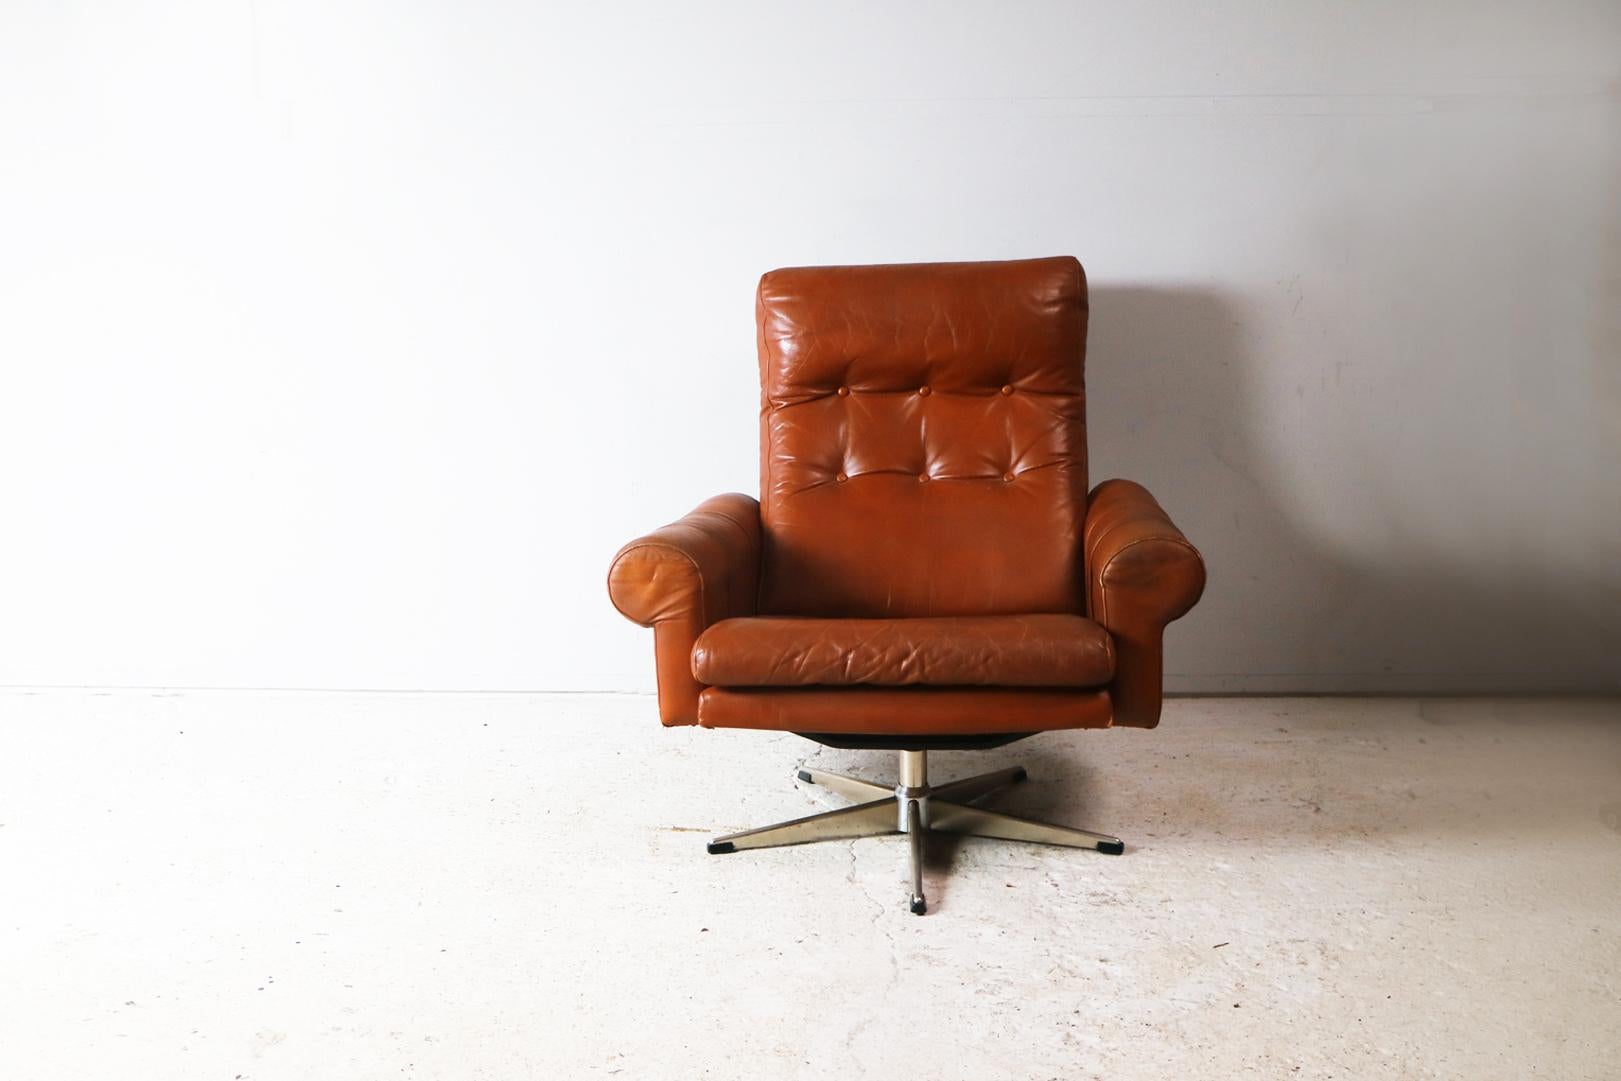 A stylish and extremely comfortable Danish Mid-Century Modern armchair. Upholstered in the original dark tan upholstery which is in very good condition. Distinctive rounded arms with strap details. Button detailing to the backrest and seat.